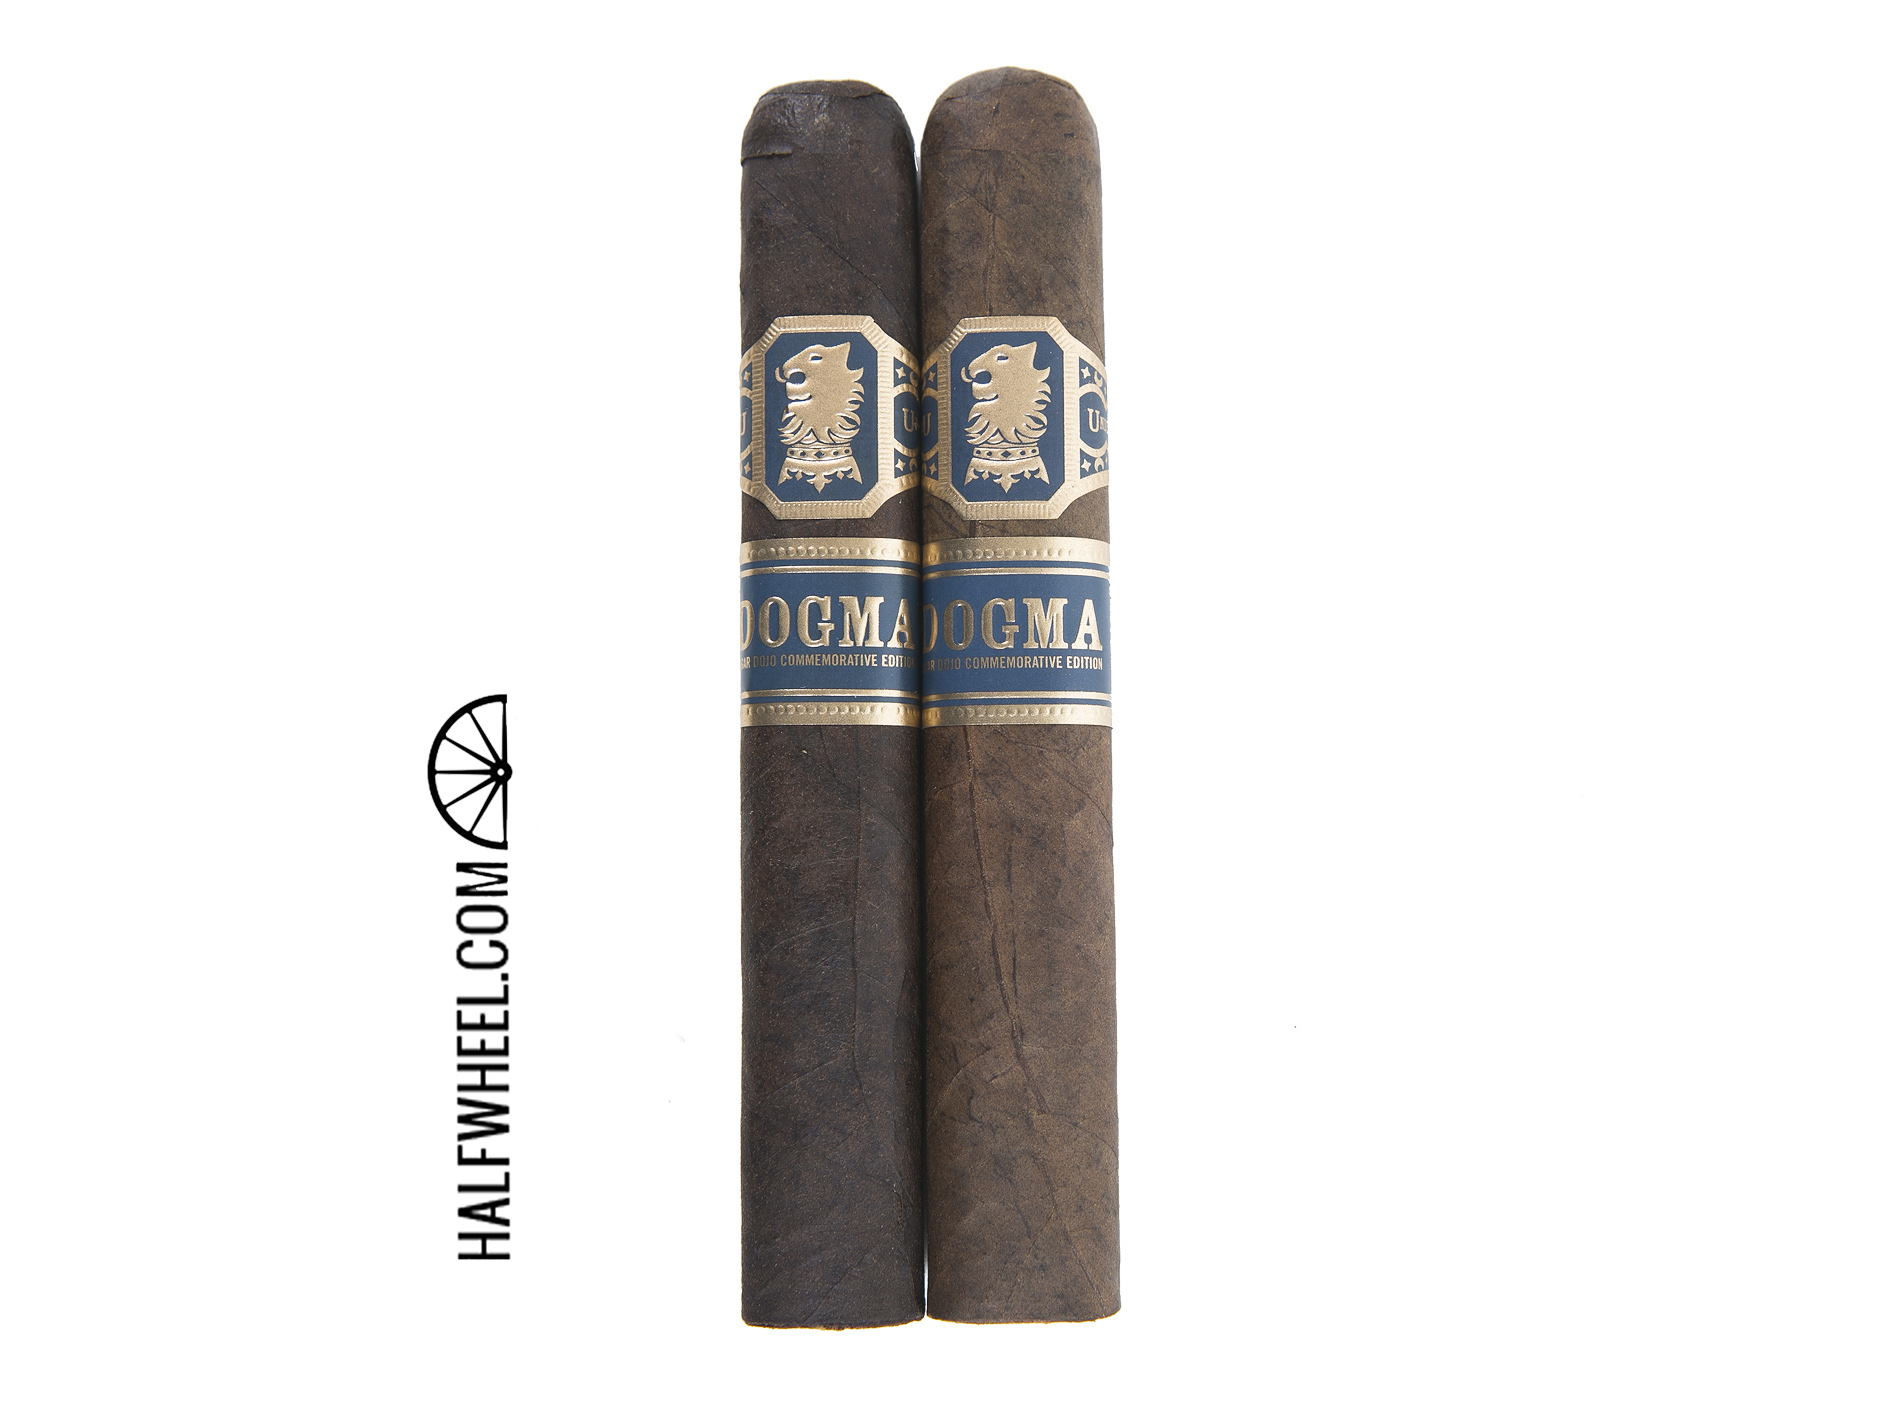 Undercrown Dogma Samples